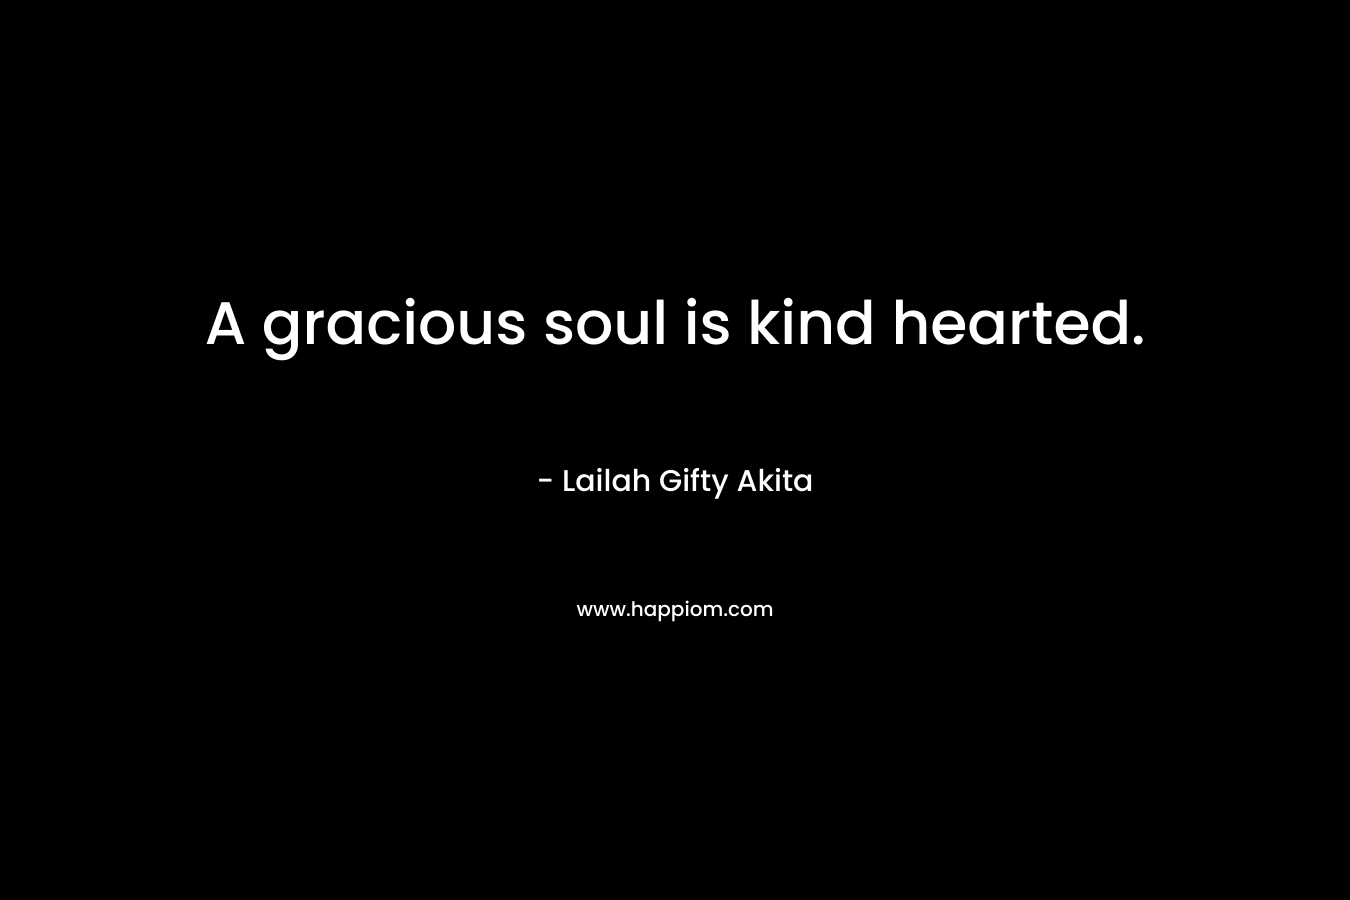 A gracious soul is kind hearted. – Lailah Gifty Akita